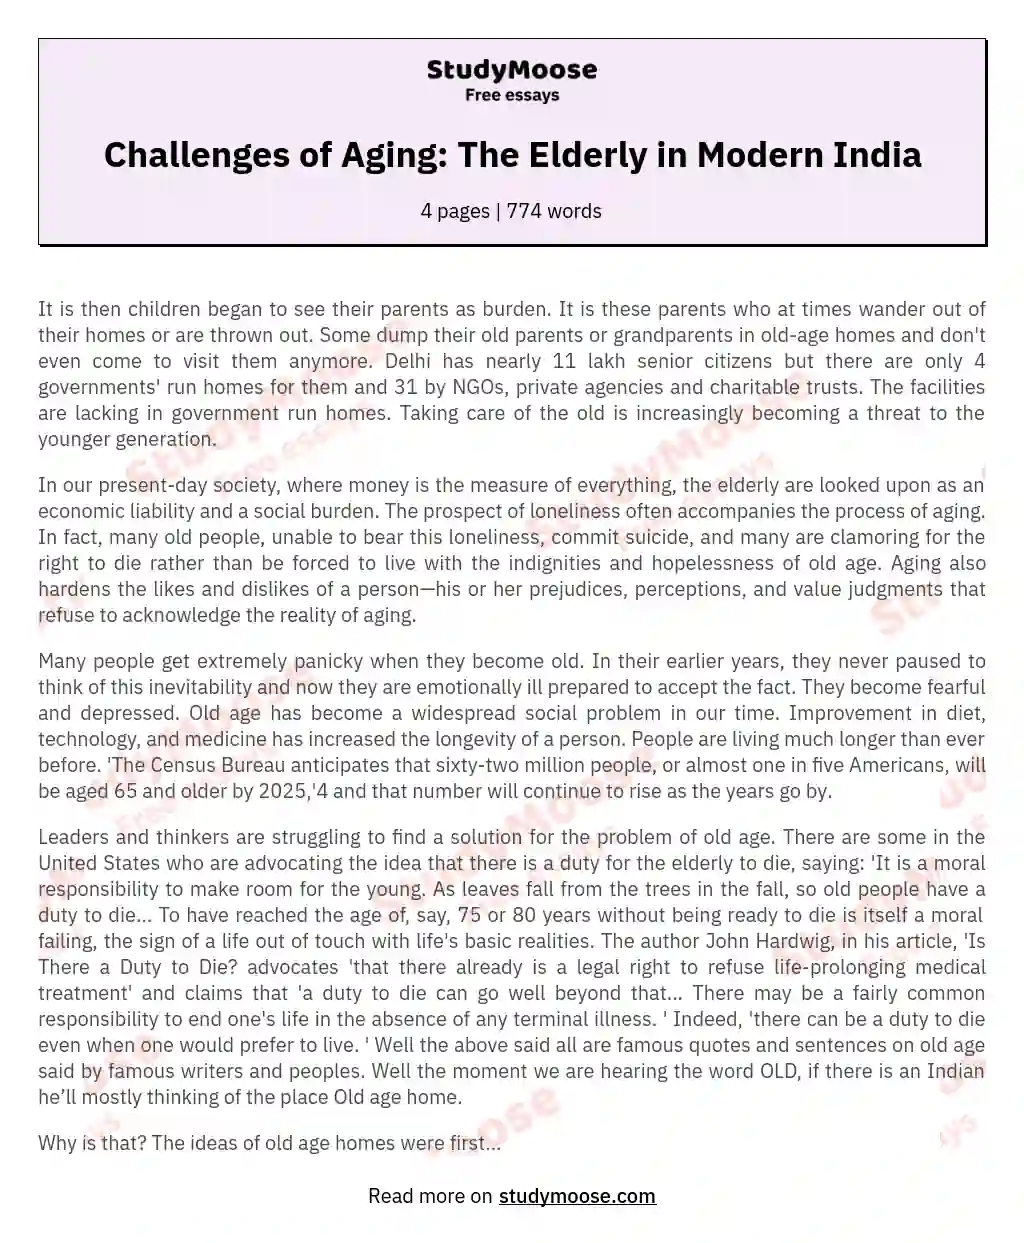 Challenges of Aging: The Elderly in Modern India essay